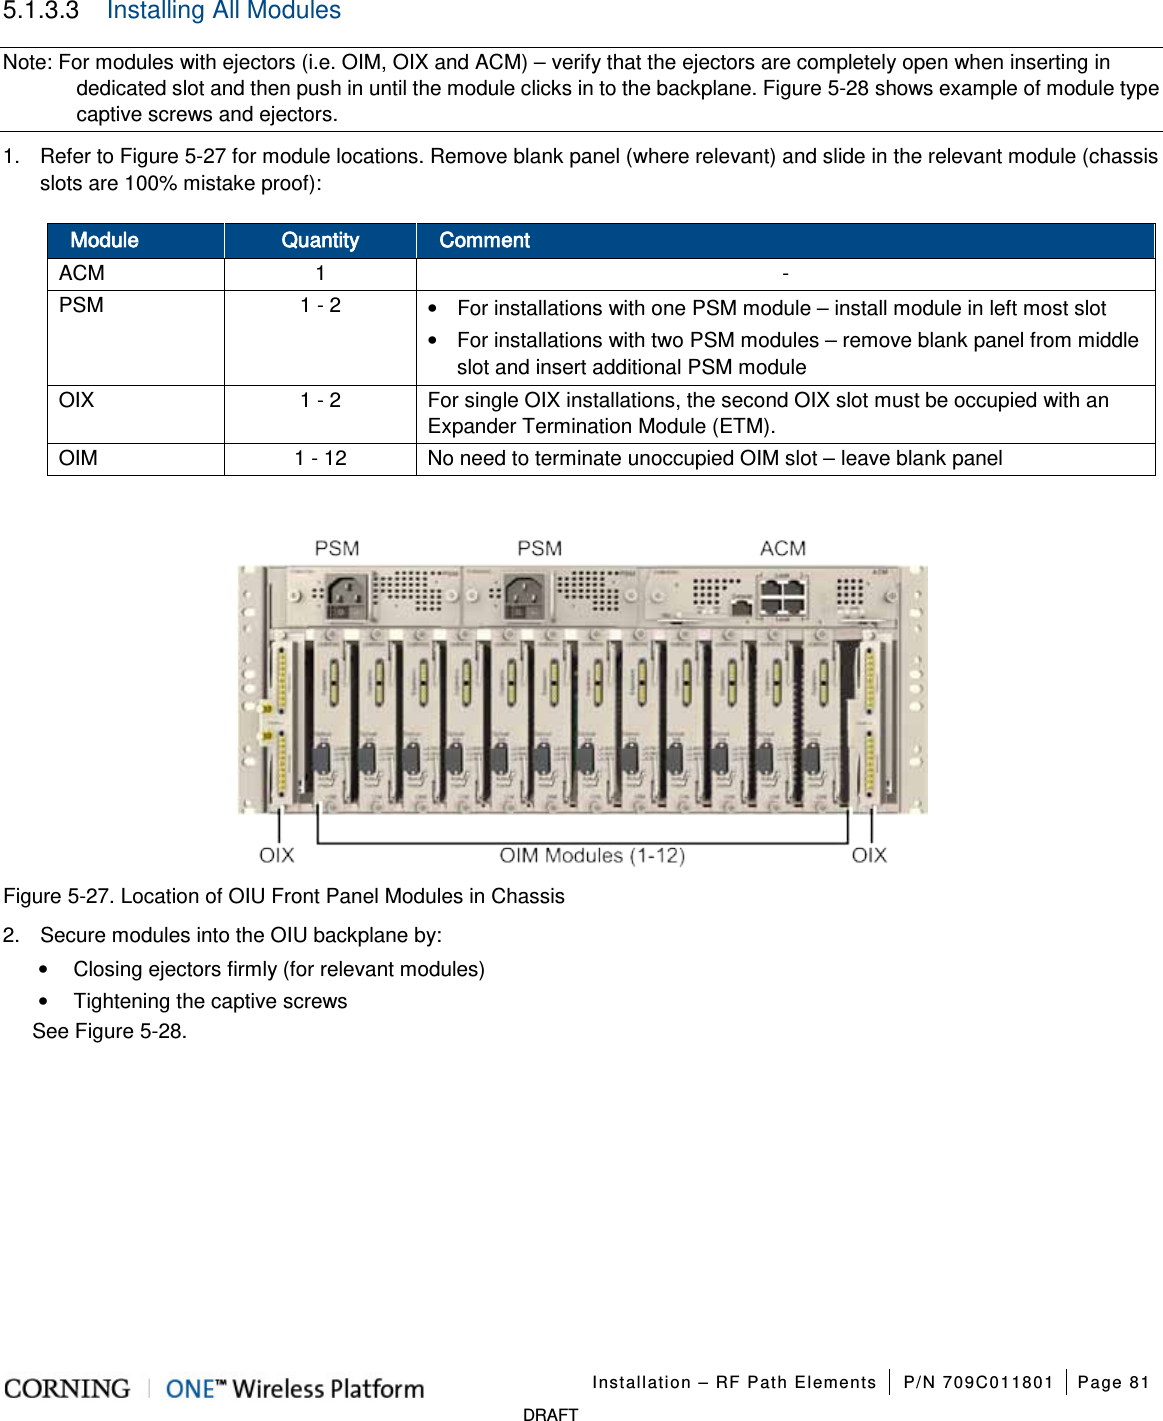   Installation – RF Path Elements P/N 709C011801 Page 81   DRAFT 5.1.3.3  Installing All Modules  Note: For modules with ejectors (i.e. OIM, OIX and ACM) – verify that the ejectors are completely open when inserting in dedicated slot and then push in until the module clicks in to the backplane. Figure  5-28 shows example of module type captive screws and ejectors. 1.  Refer to Figure  5-27 for module locations. Remove blank panel (where relevant) and slide in the relevant module (chassis slots are 100% mistake proof):   Module Quantity Comment ACM    1  - PSM 1 - 2  • For installations with one PSM module – install module in left most slot • For installations with two PSM modules – remove blank panel from middle slot and insert additional PSM module OIX 1 - 2  For single OIX installations, the second OIX slot must be occupied with an Expander Termination Module (ETM). OIM 1 - 12 No need to terminate unoccupied OIM slot – leave blank panel     Figure  5-27. Location of OIU Front Panel Modules in Chassis 2.  Secure modules into the OIU backplane by: • Closing ejectors firmly (for relevant modules) • Tightening the captive screws   See Figure  5-28.   